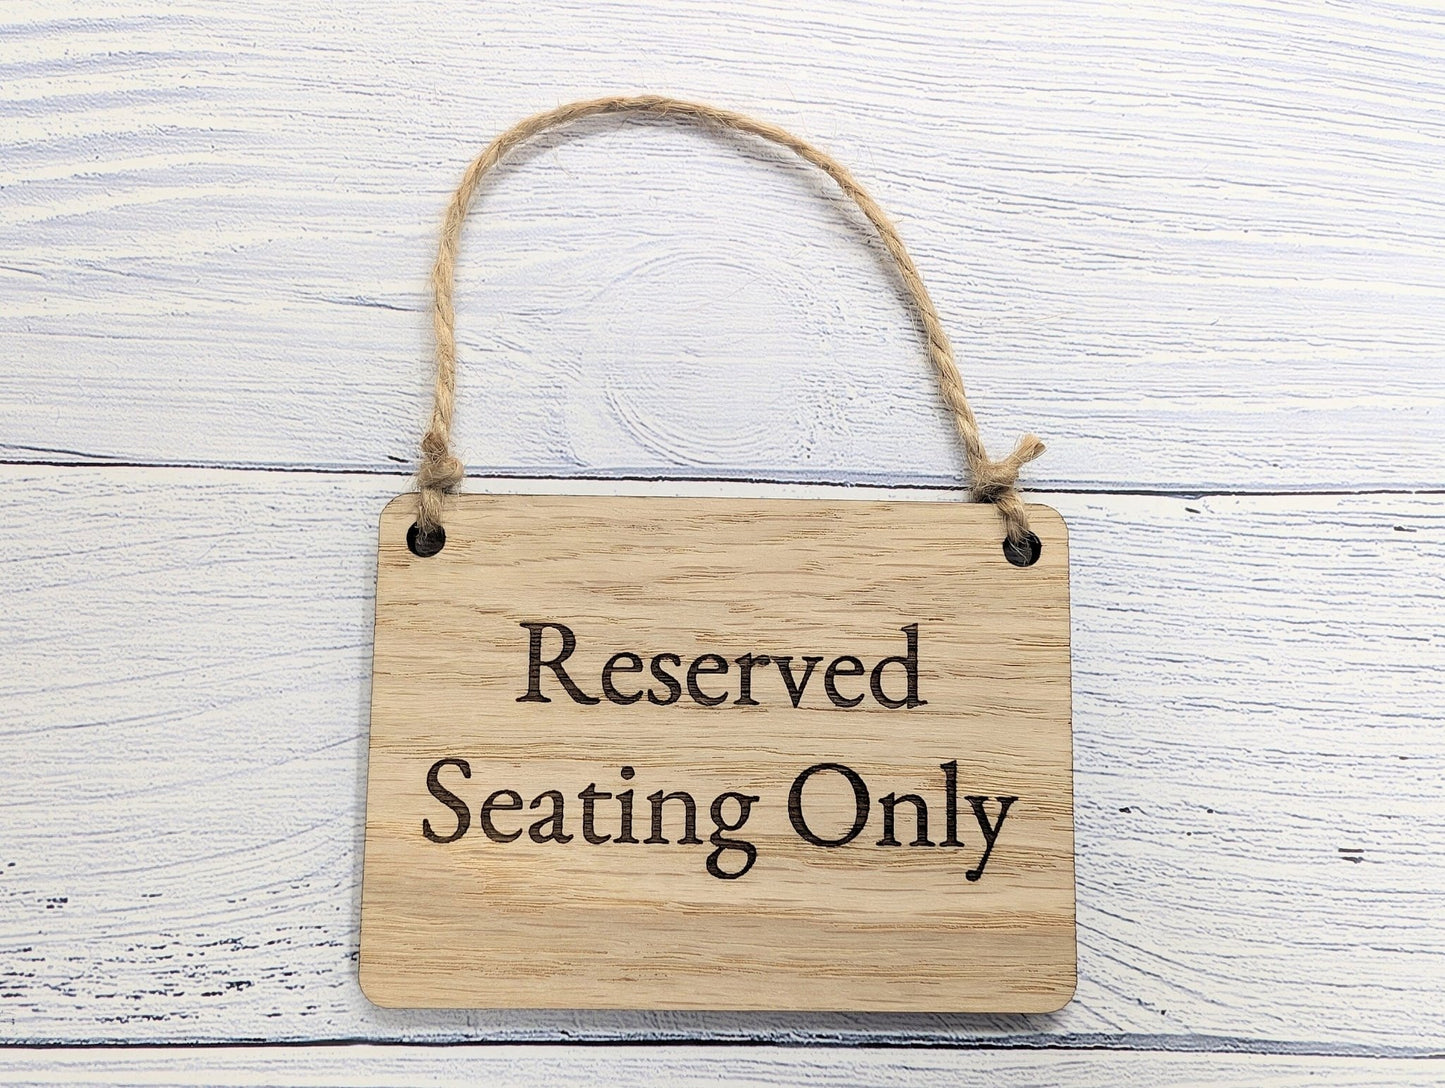 Reserved Seating Only Wooden Sign - Elegant Indoor Signage - Available in 4 Sizes - Door Sign, Wall Sign, Bulk Welcome - CherryGroveCraft